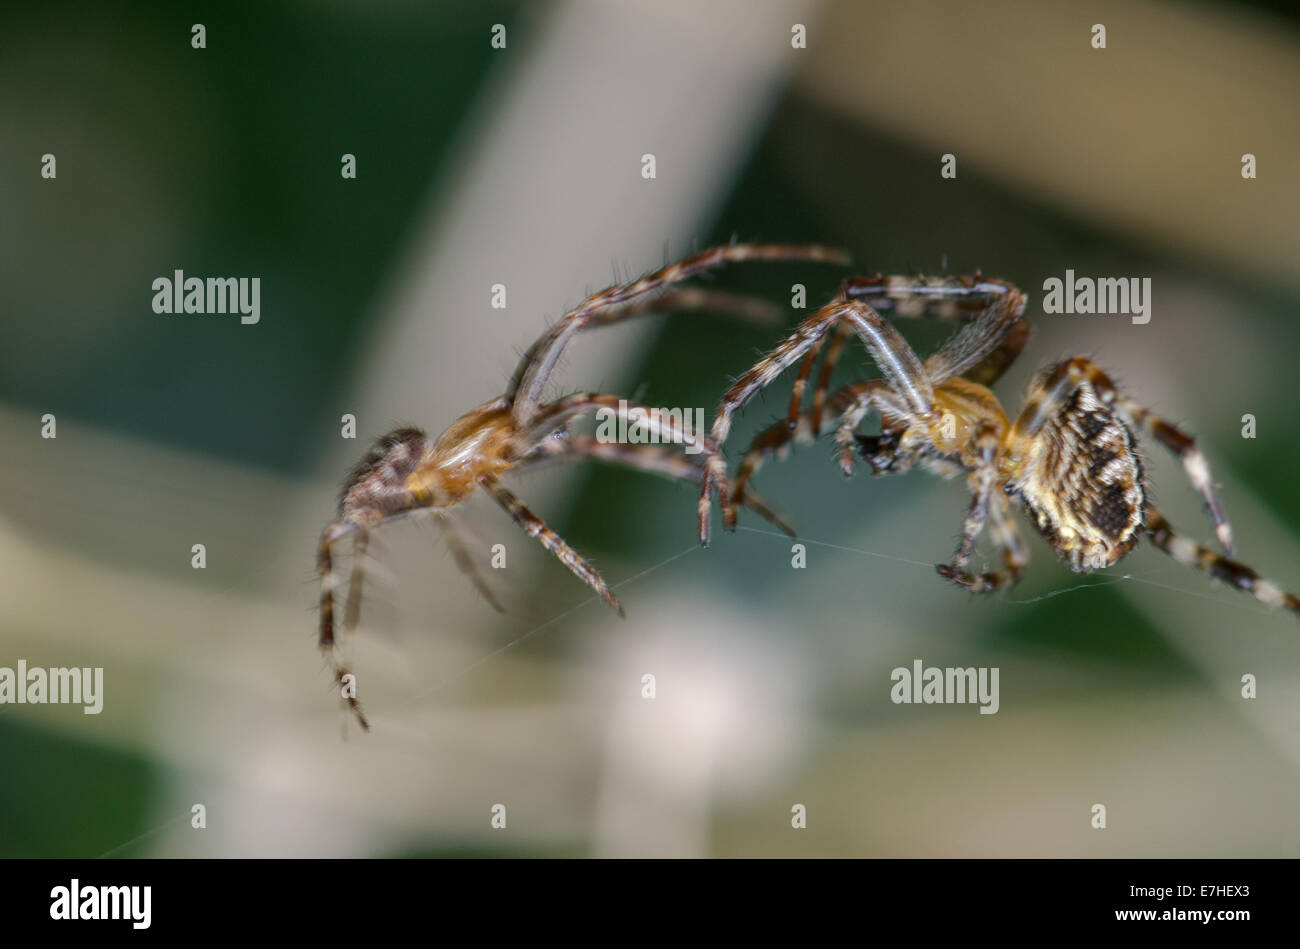 Male And Female Garden Spiders Stock Photo 73528955 Alamy